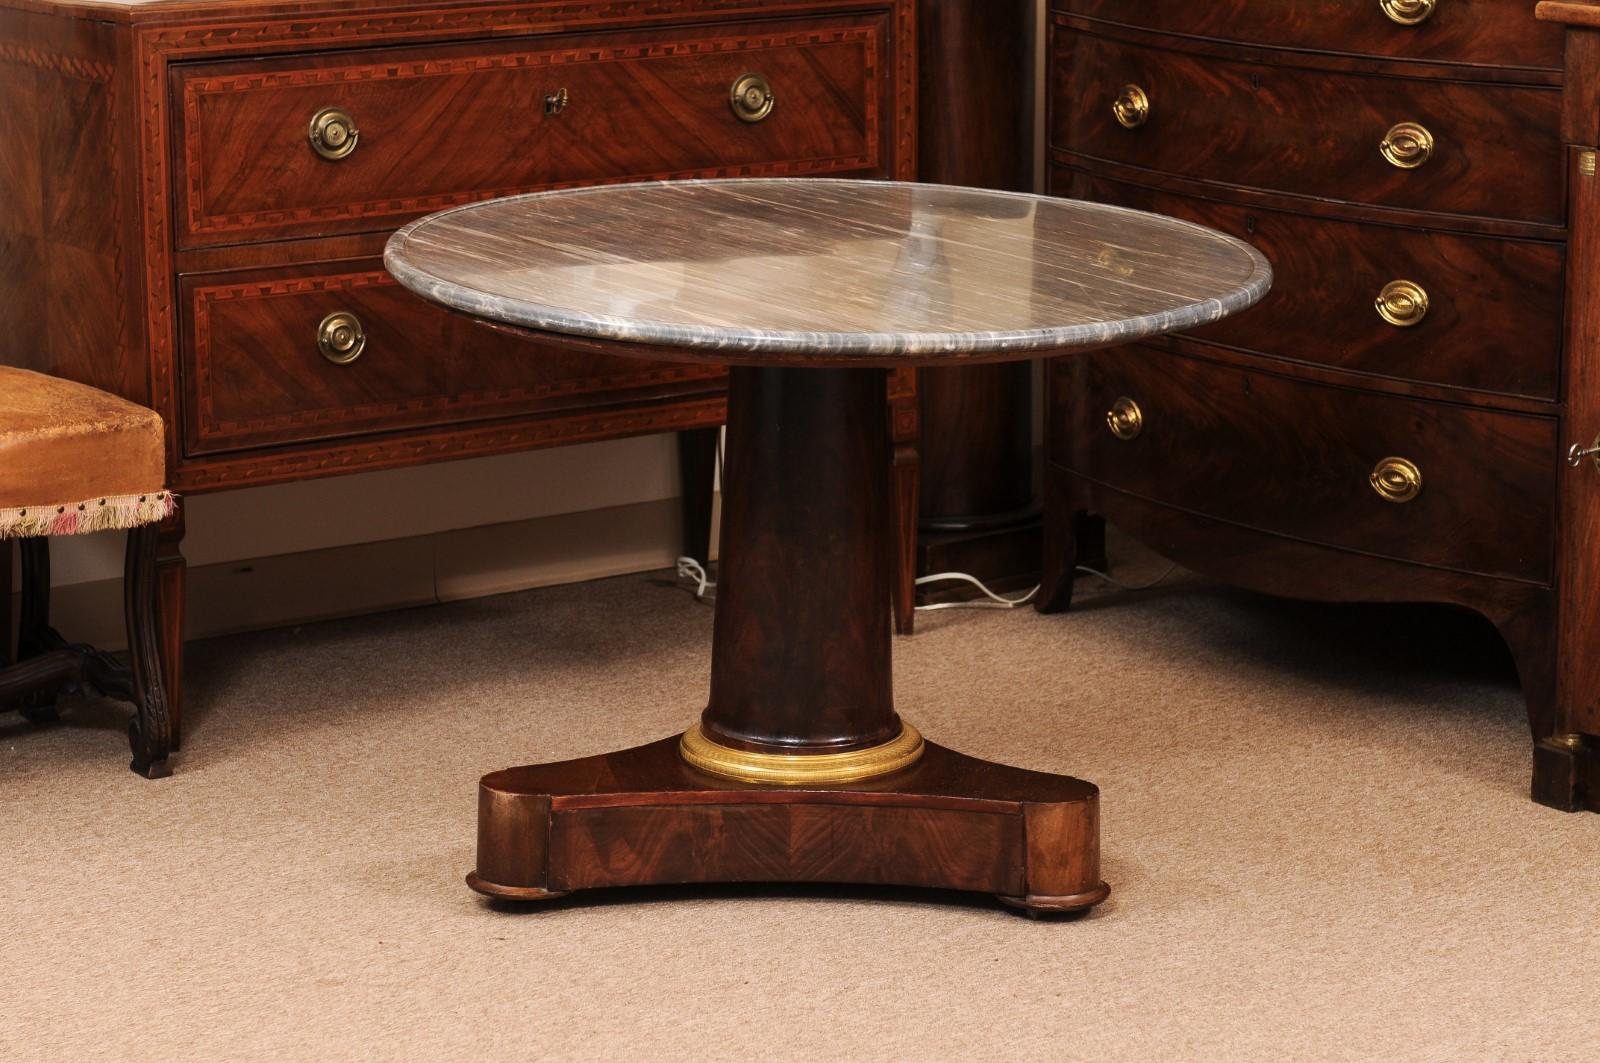  Early 19th C French Empire Walnut Center Table, Grey Marble Top & Ormolu Detail For Sale 7